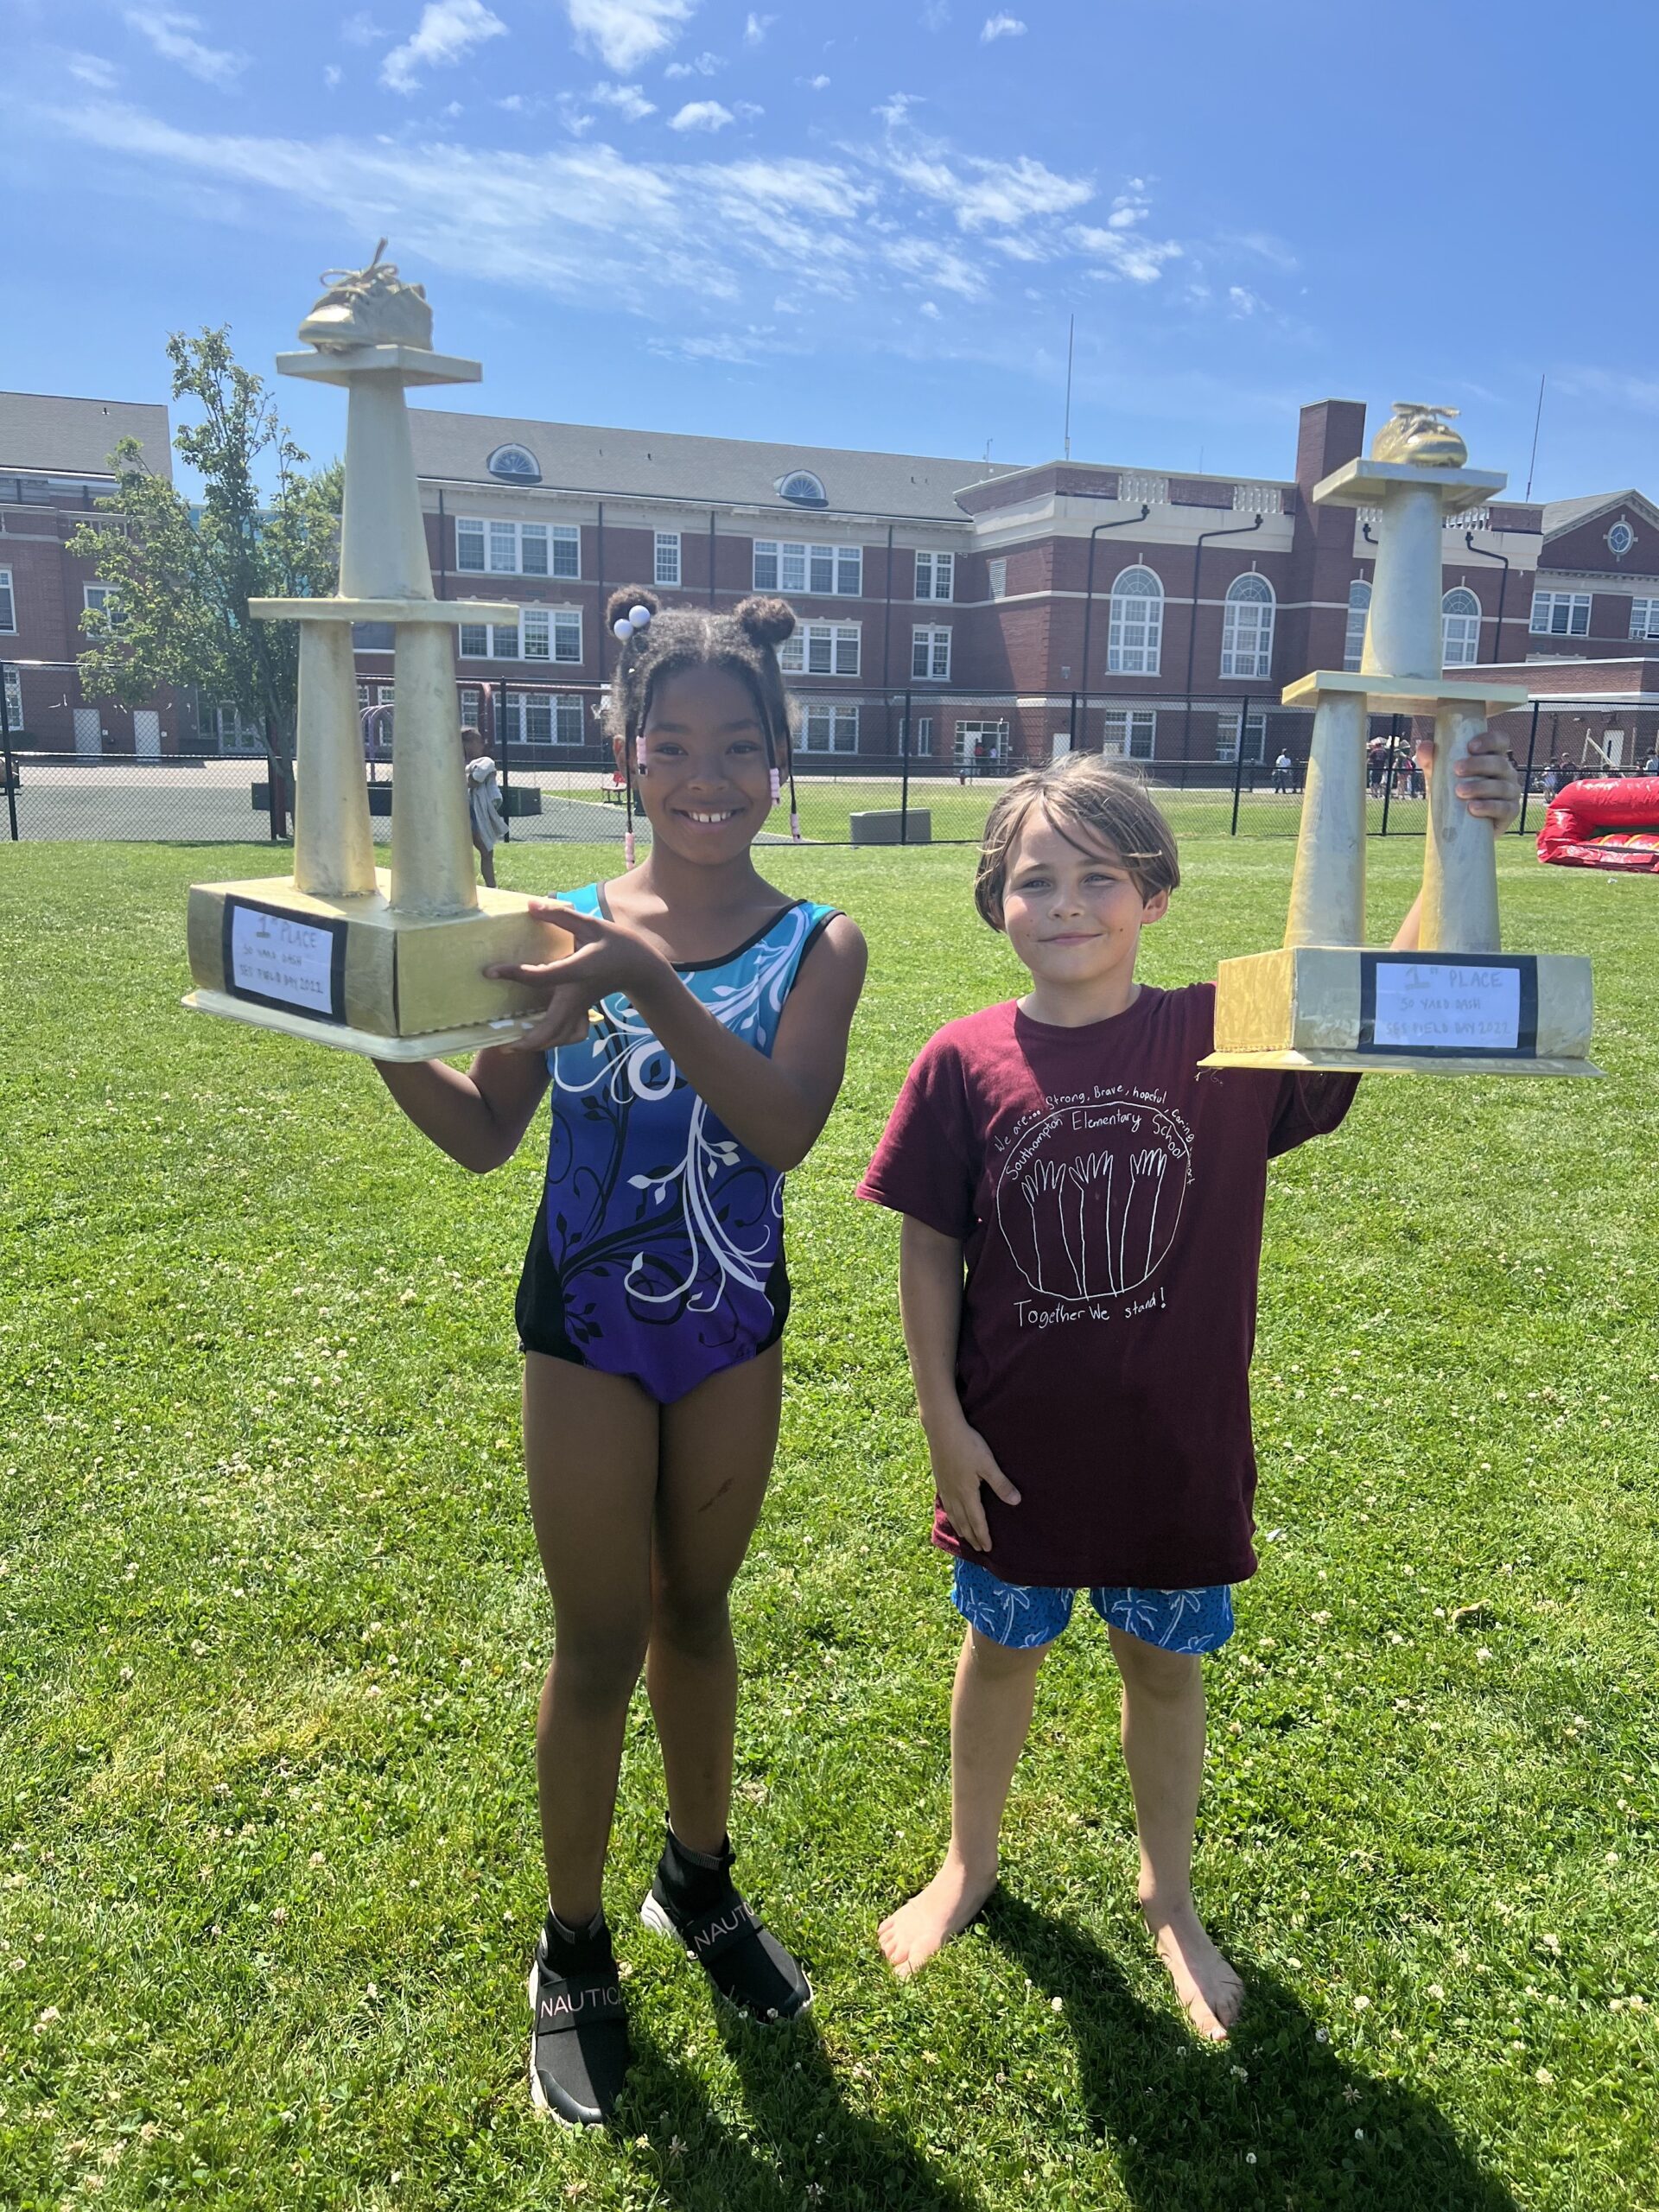 Brielle James and Jayden Styler each won a Golden Sneaker trophy for winning the 50-yard dash in their division during Southampton Elementary School's annual field day.  COURTESY SOUTHAMPTON SCHOOL DISTRICT